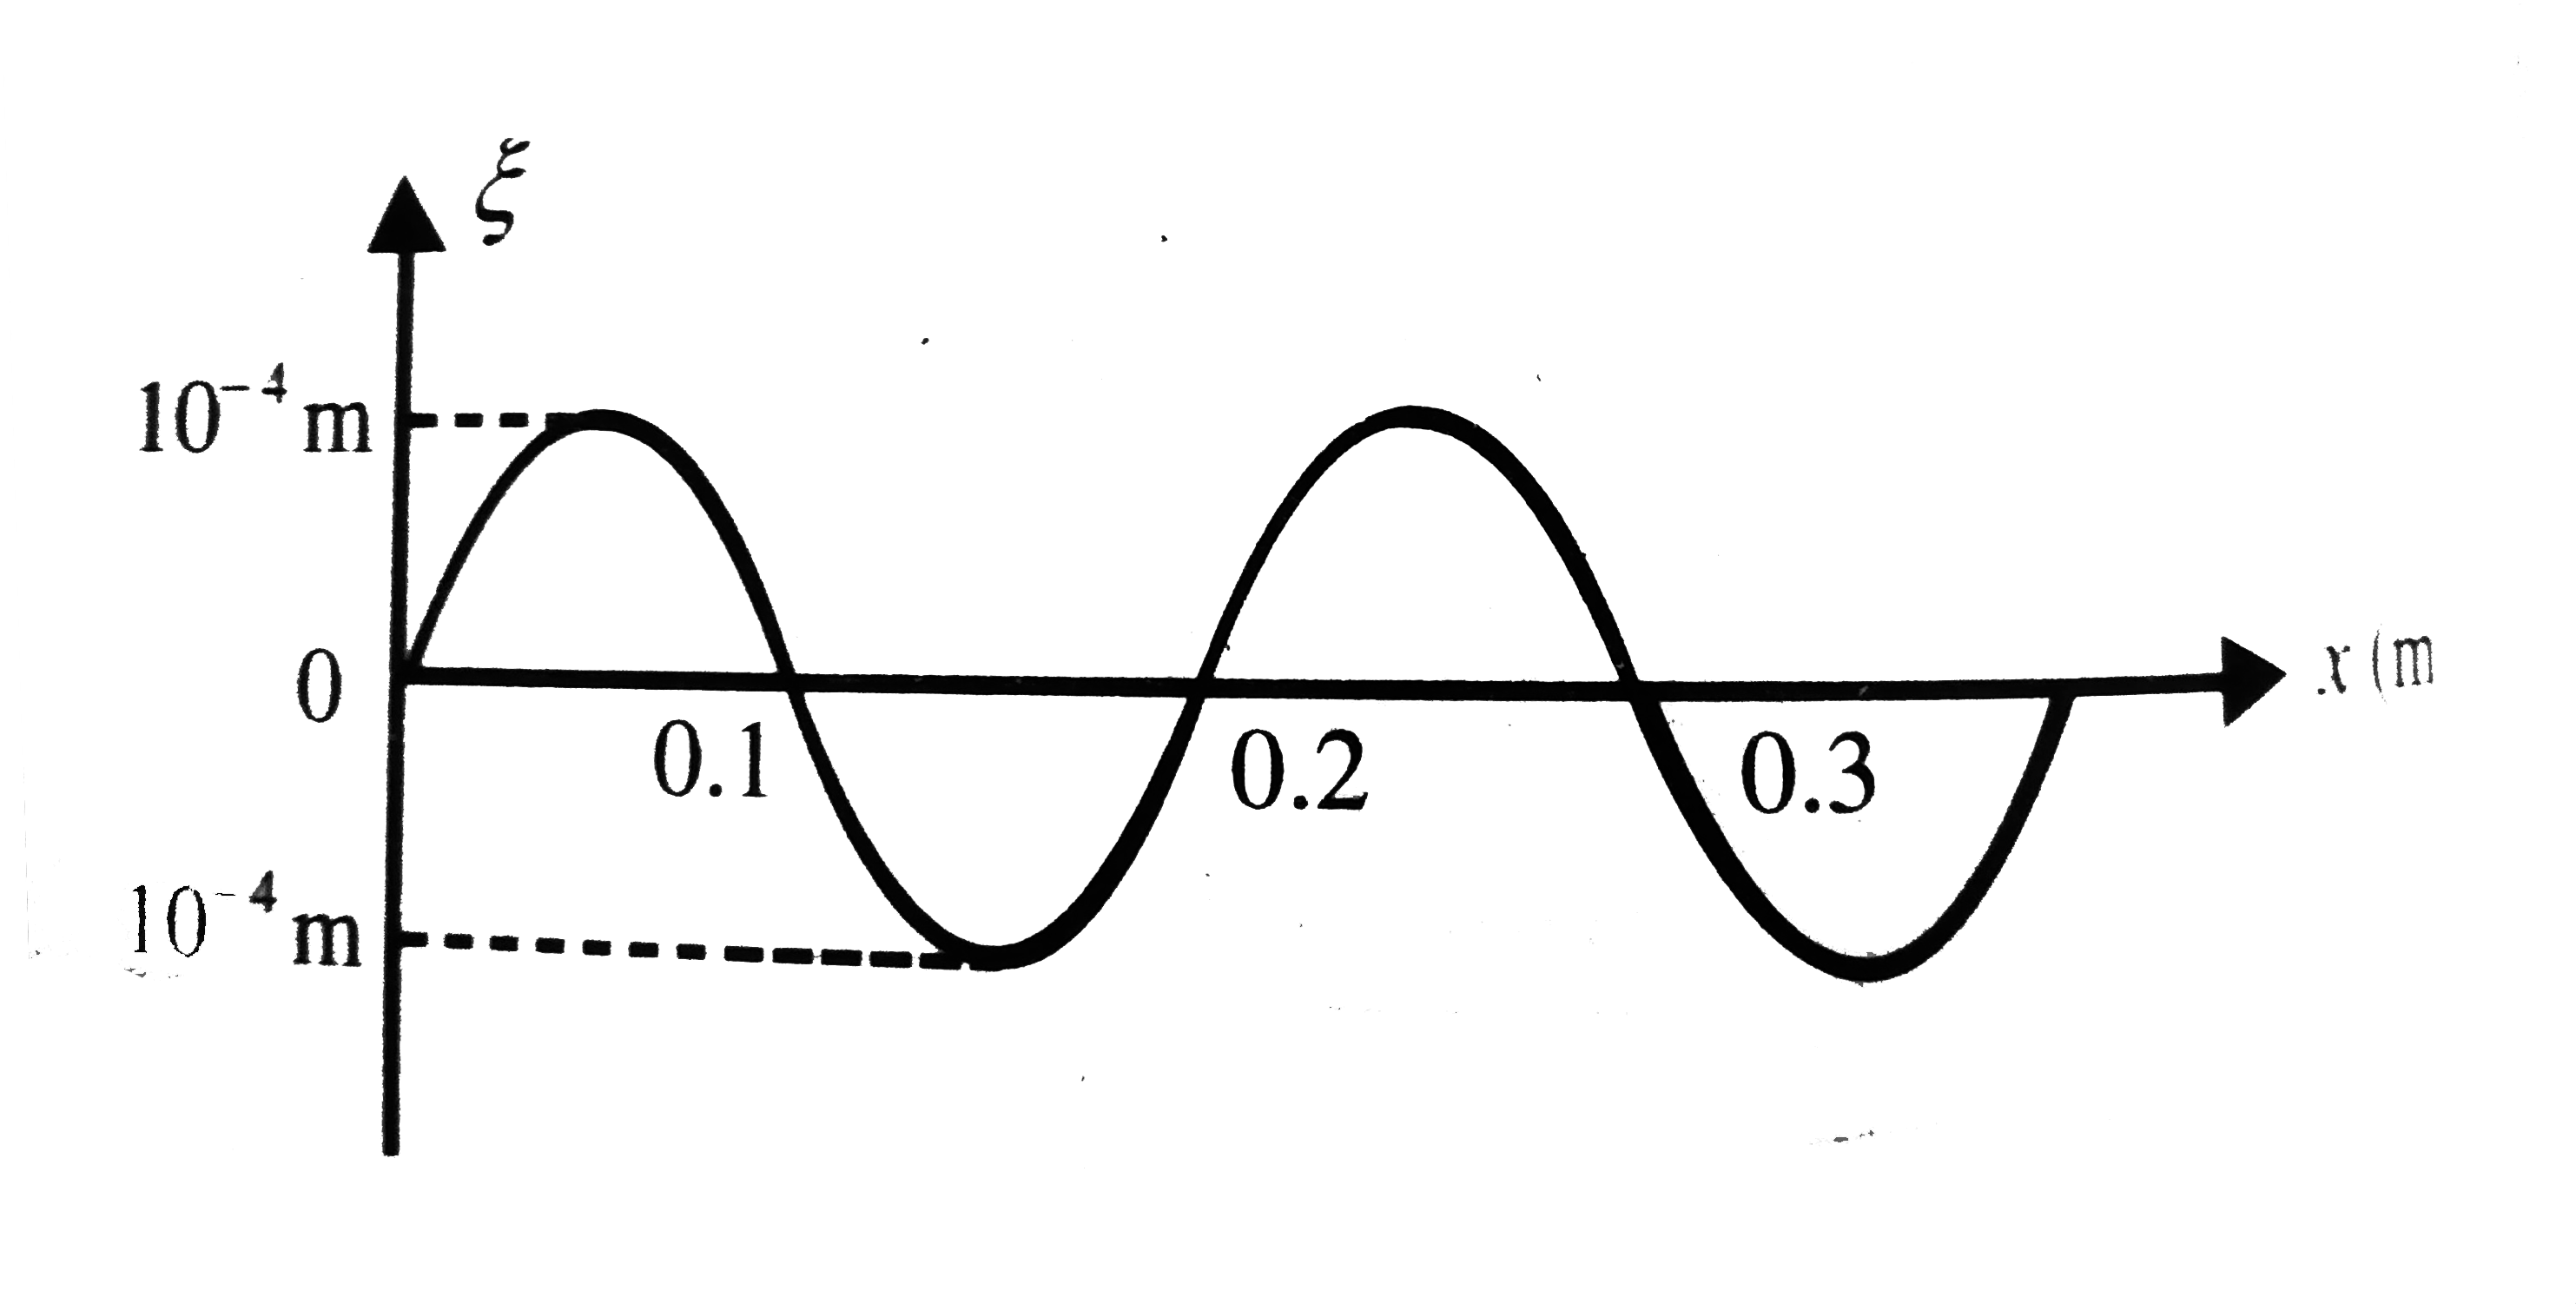 For a sound wave travelling towards +x direction, sinusoidal longitudinal displacement epsi at a certain time is given as a function of x (Fig). If bulk modulus of air is B=5xx10^5(N)/(m^2), the variation of pressure excess will be